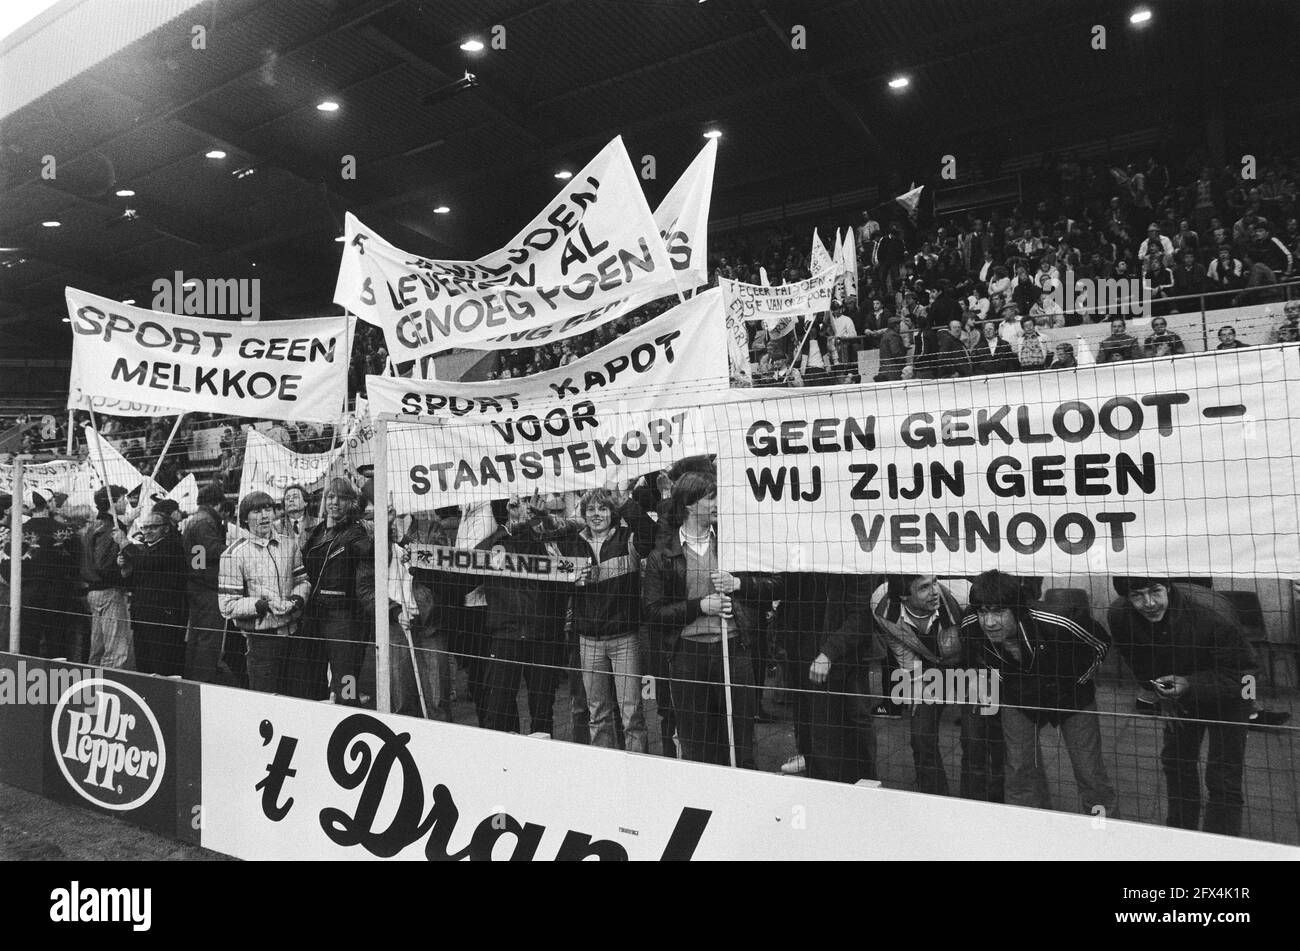 Demonstration during soccer Netherlands against Greece in PSV stadium against CRM plan to make soccer clubs pay corporate tax, April 14, 1982, Demonstration, sports, soccer, The Netherlands, 20th century press agency photo, news to remember, documentary, historic photography 1945-1990, visual stories, human history of the Twentieth Century, capturing moments in time Stock Photo